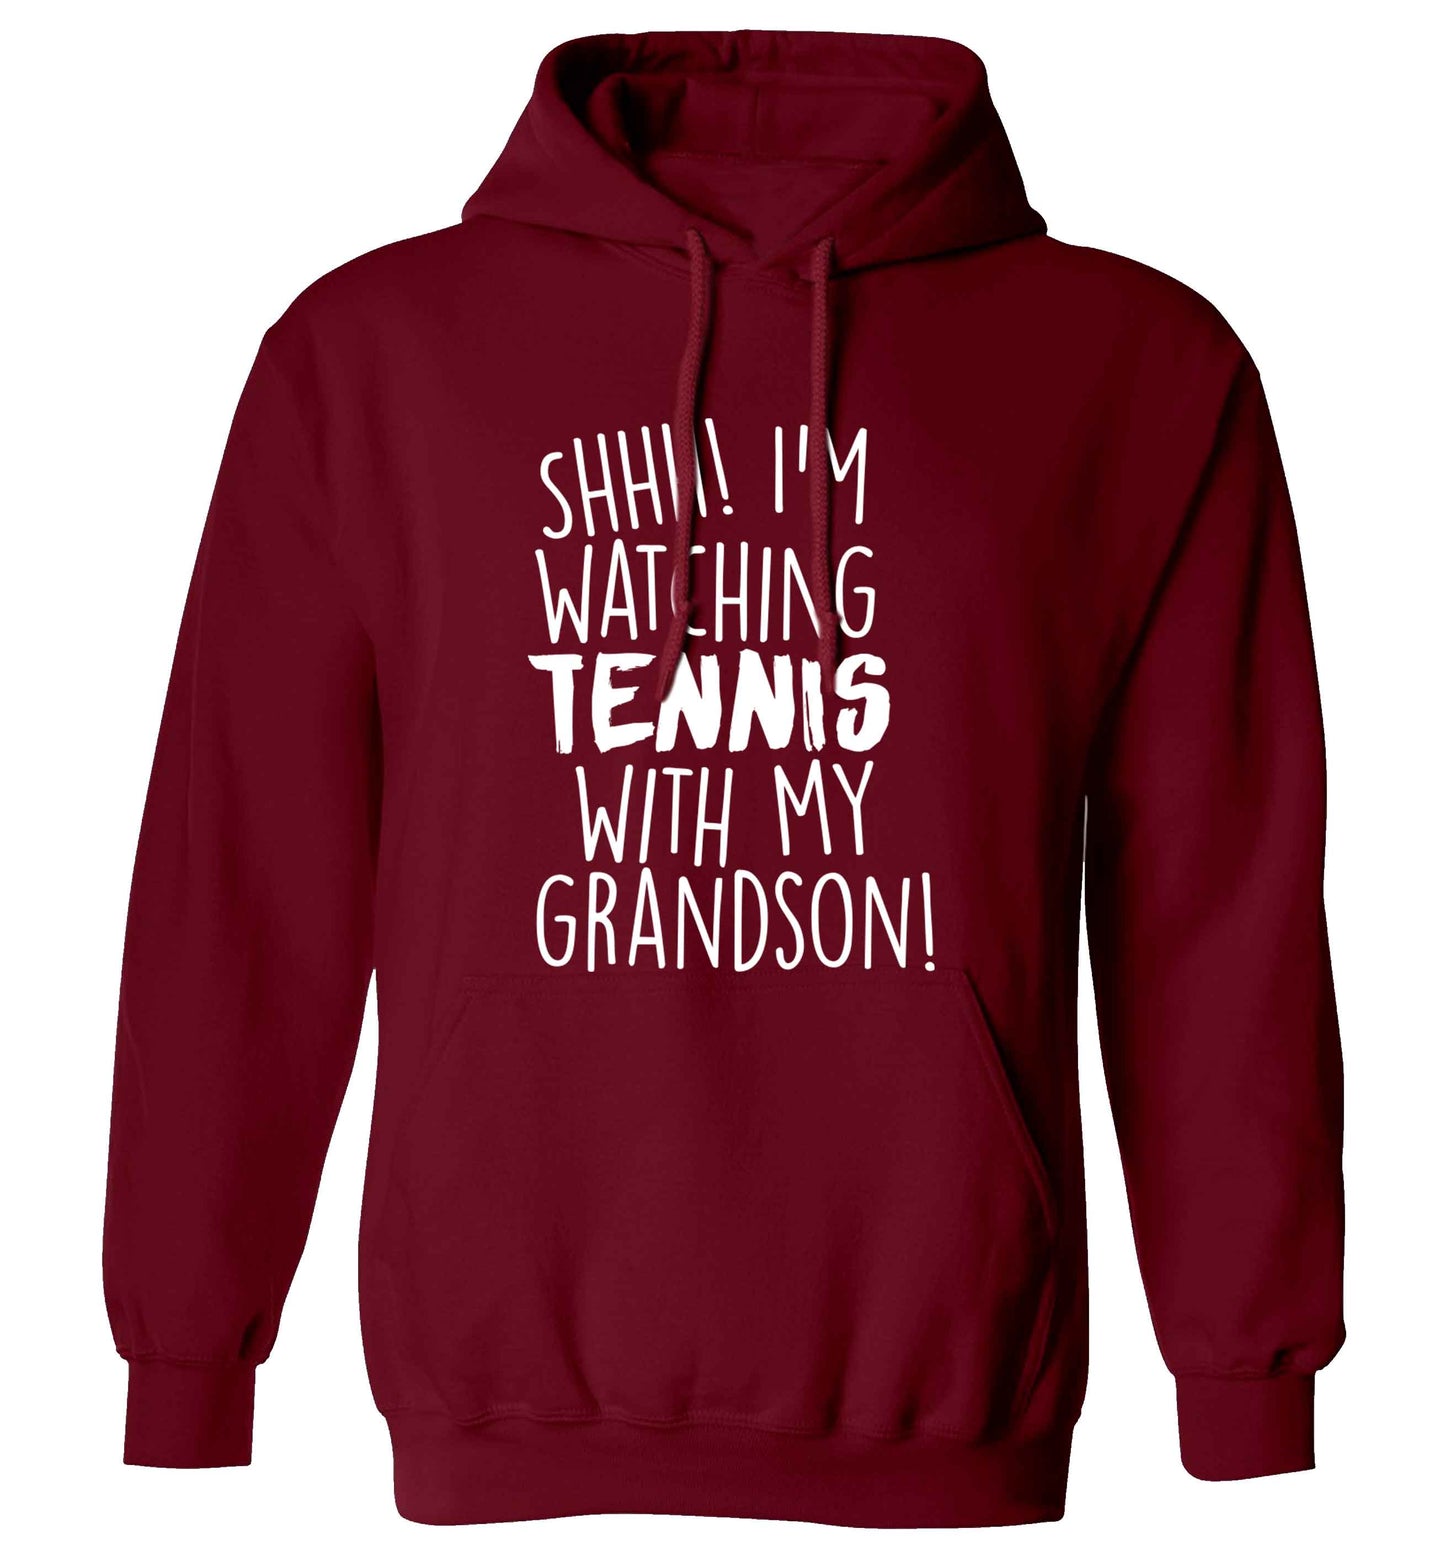 Shh! I'm watching tennis with my grandson! adults unisex maroon hoodie 2XL